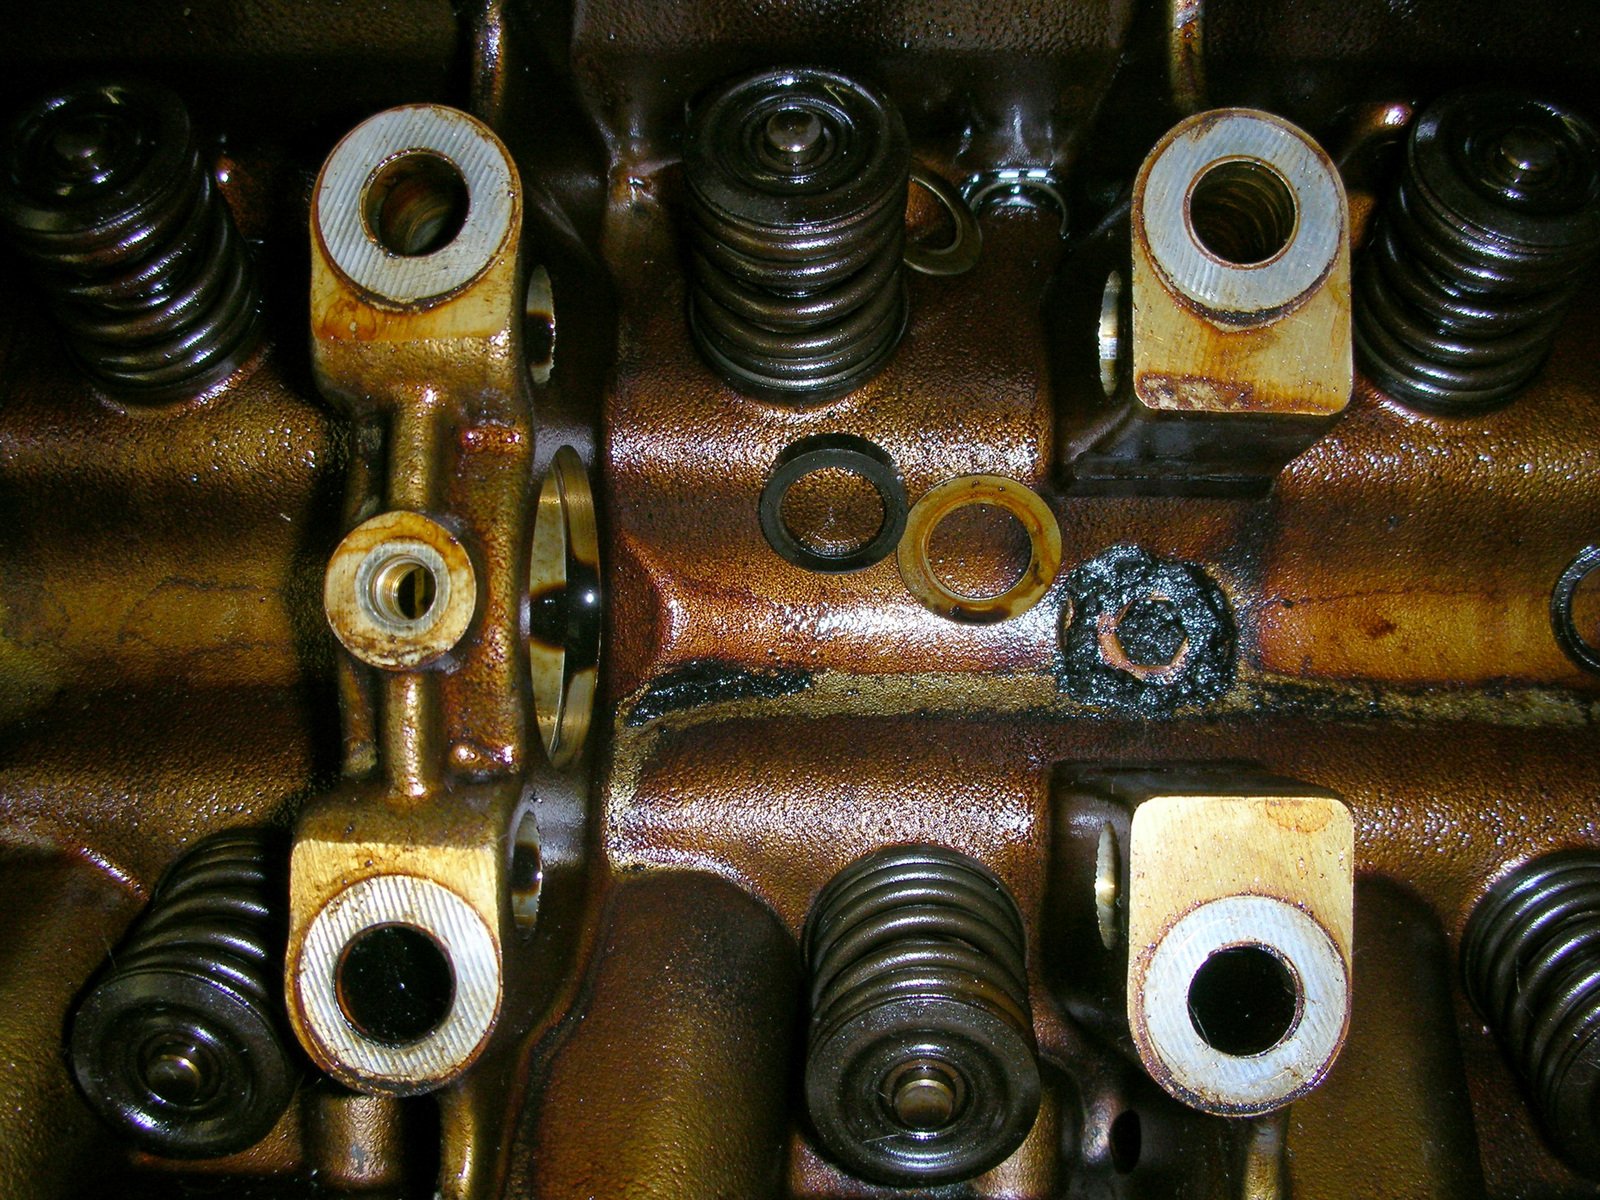 a close up po of an old engine and gear